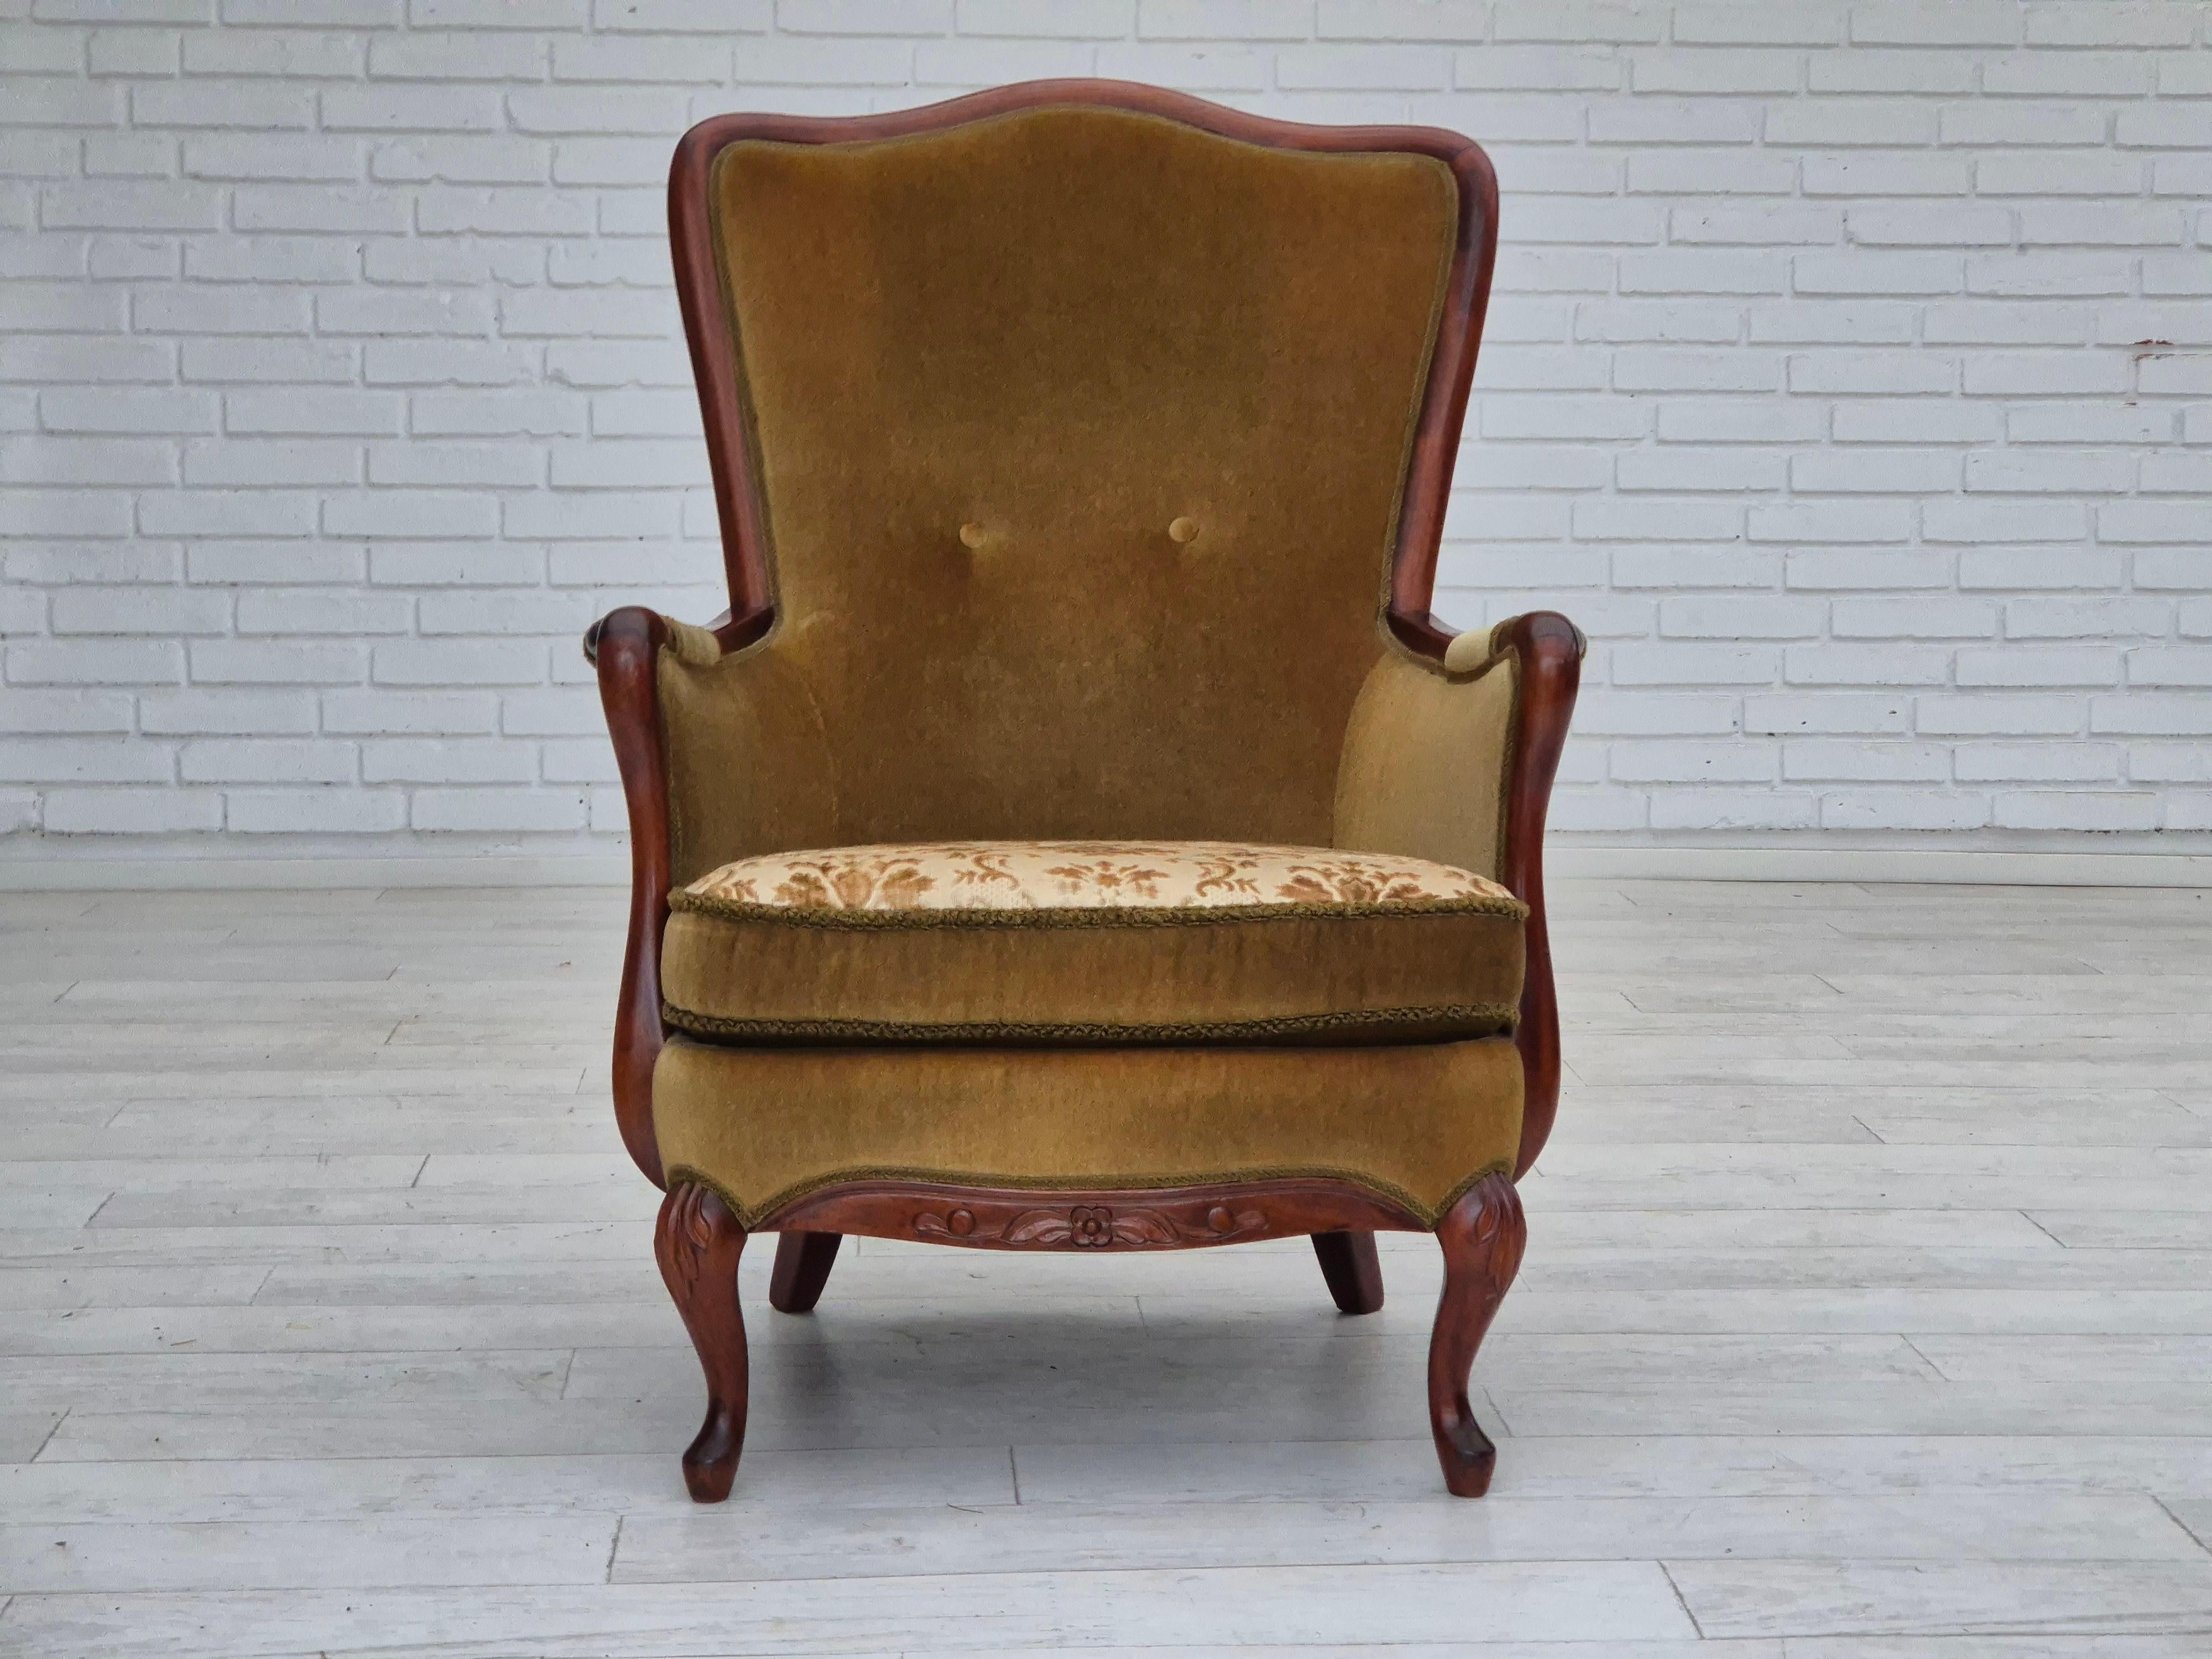 1950s, Danish armchair in original good condition: no smells. Light olive green furniture velour. Laqiered teak wood. Double-sided seat cushion. Springs in the seat cushion. Manufactured by Danish furniture manufacturer in about 1950s.